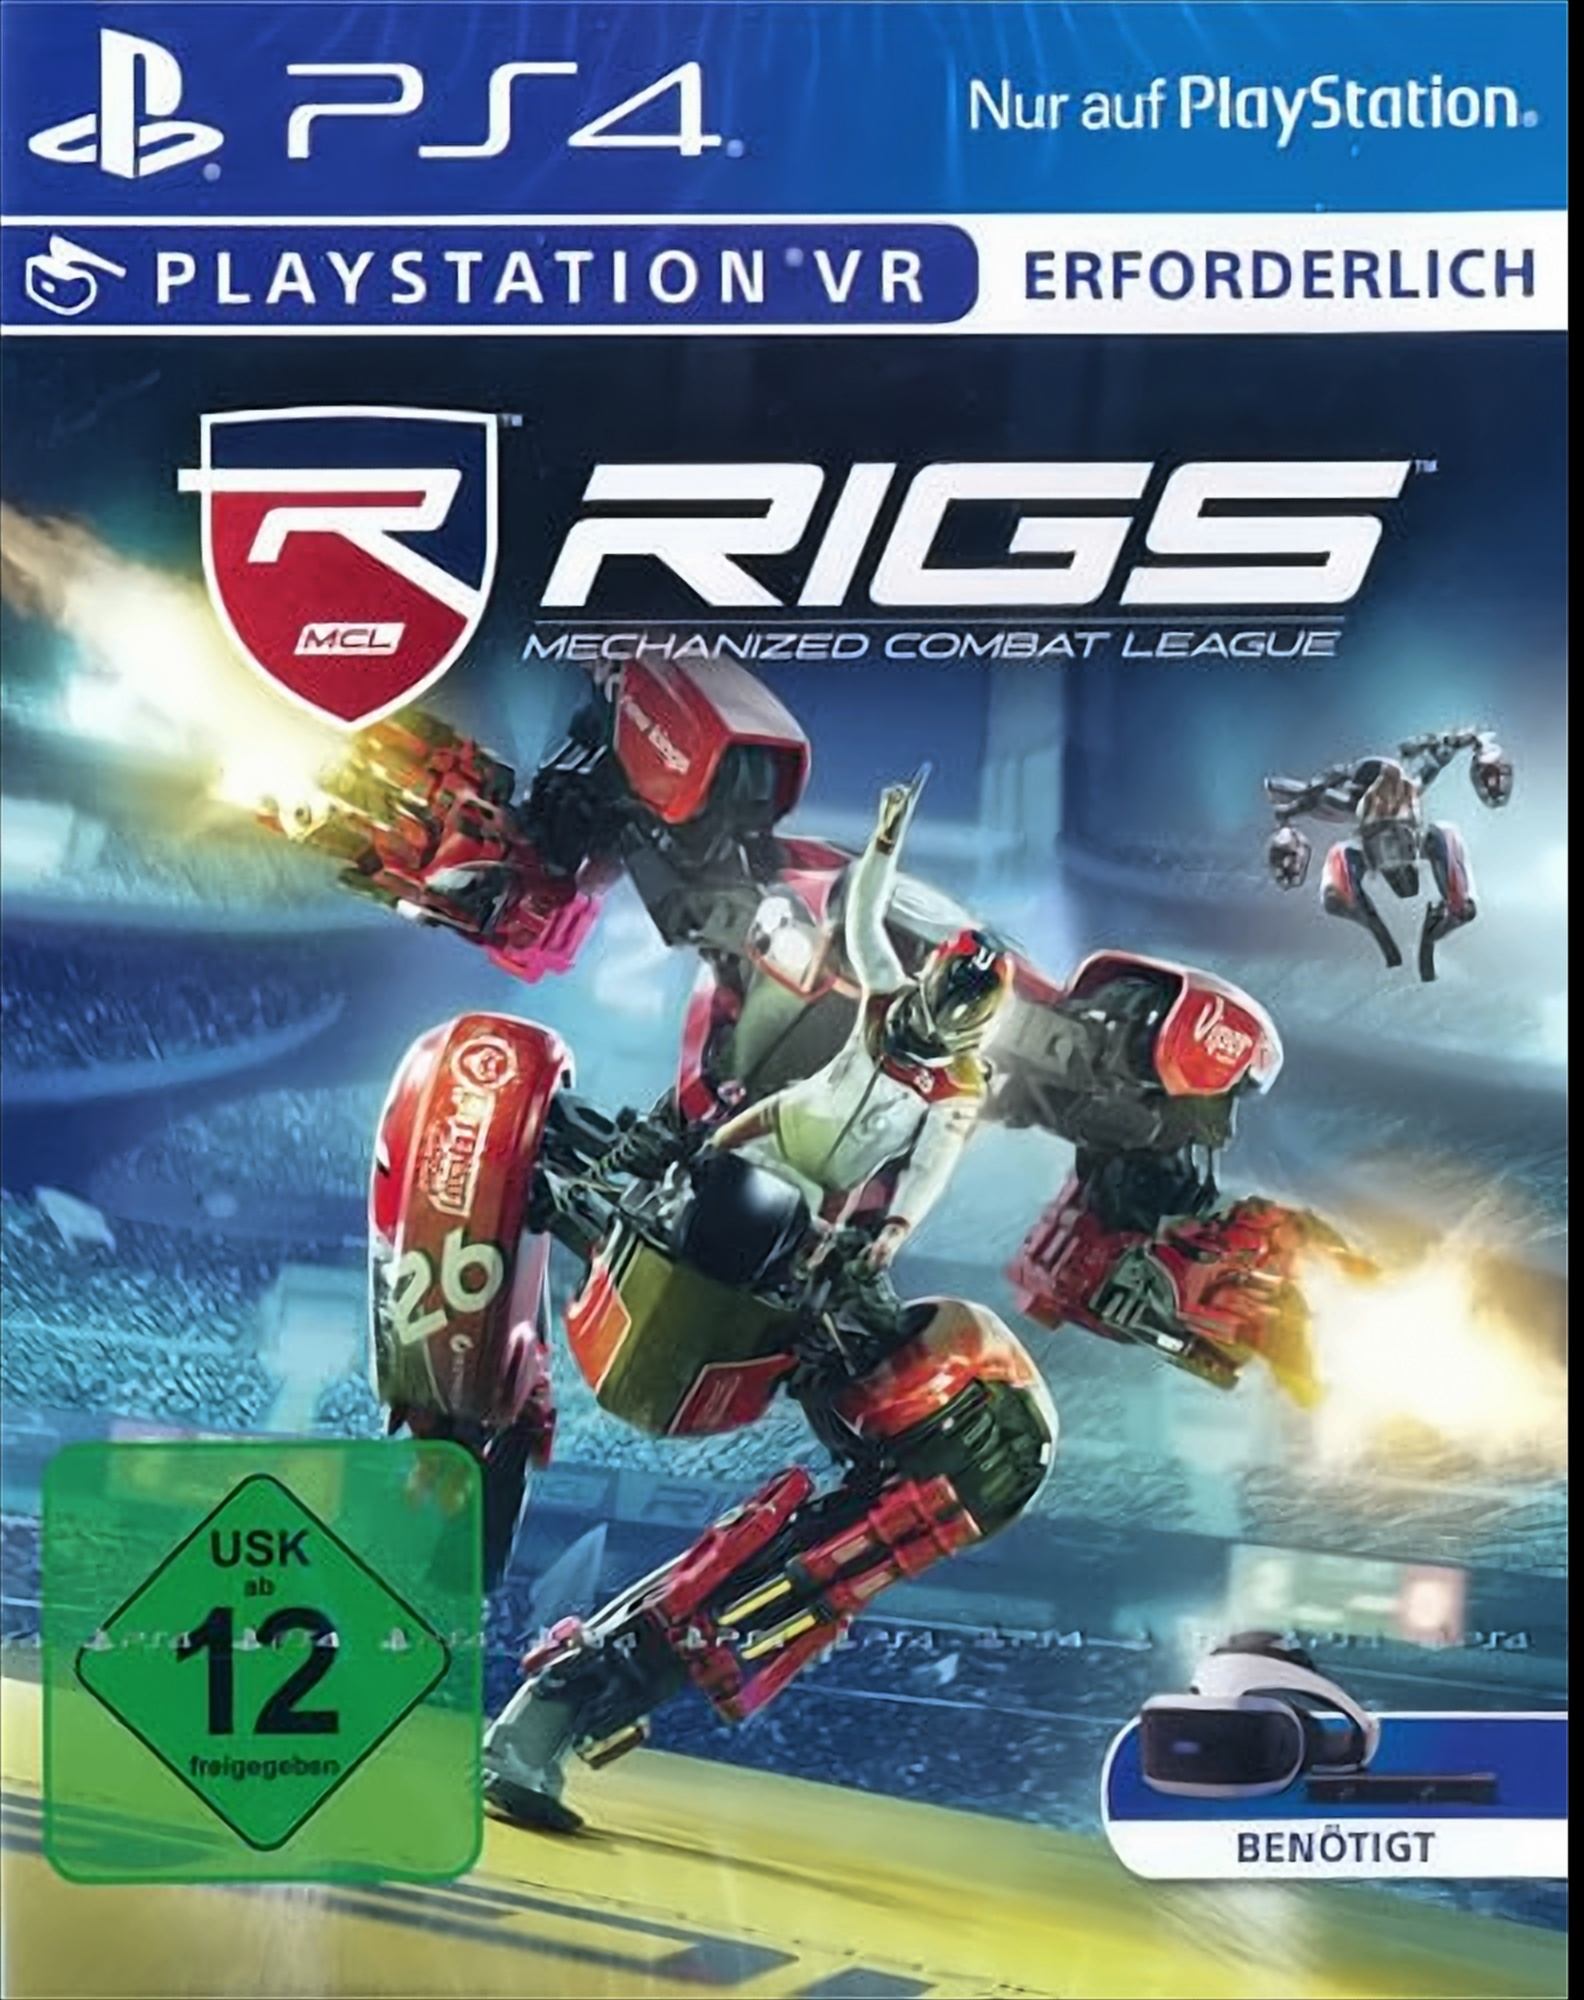 (only Combat VR) - League 4] Mechanized RIGS: [PlayStation